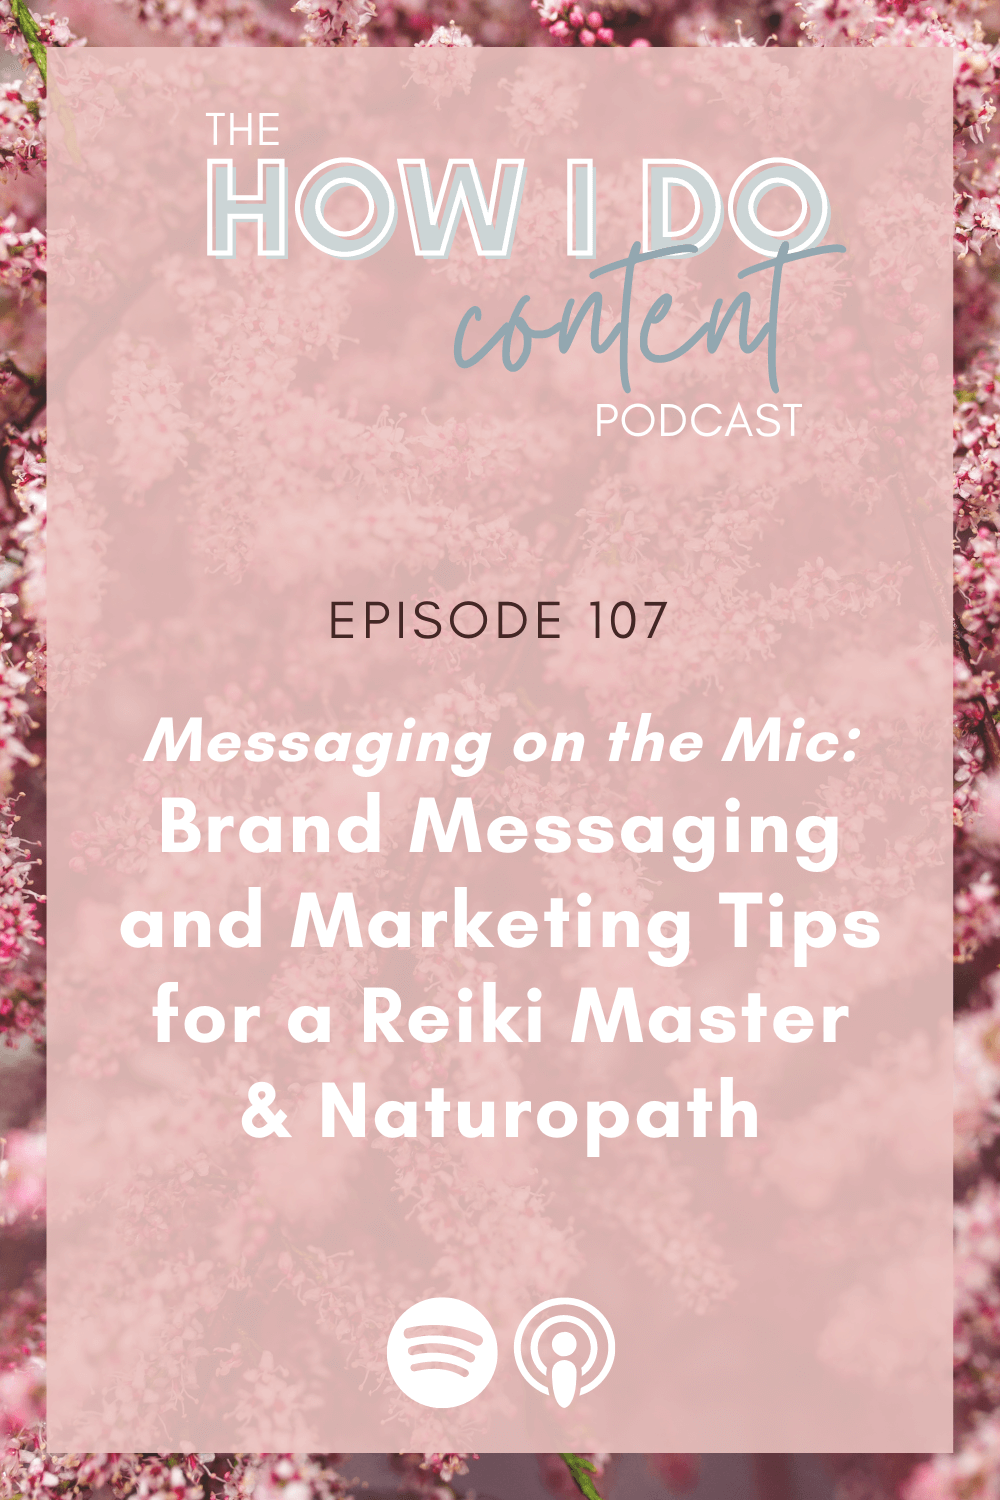 Top brand messaging and marketing tips for a Reiki Master & Naturopath